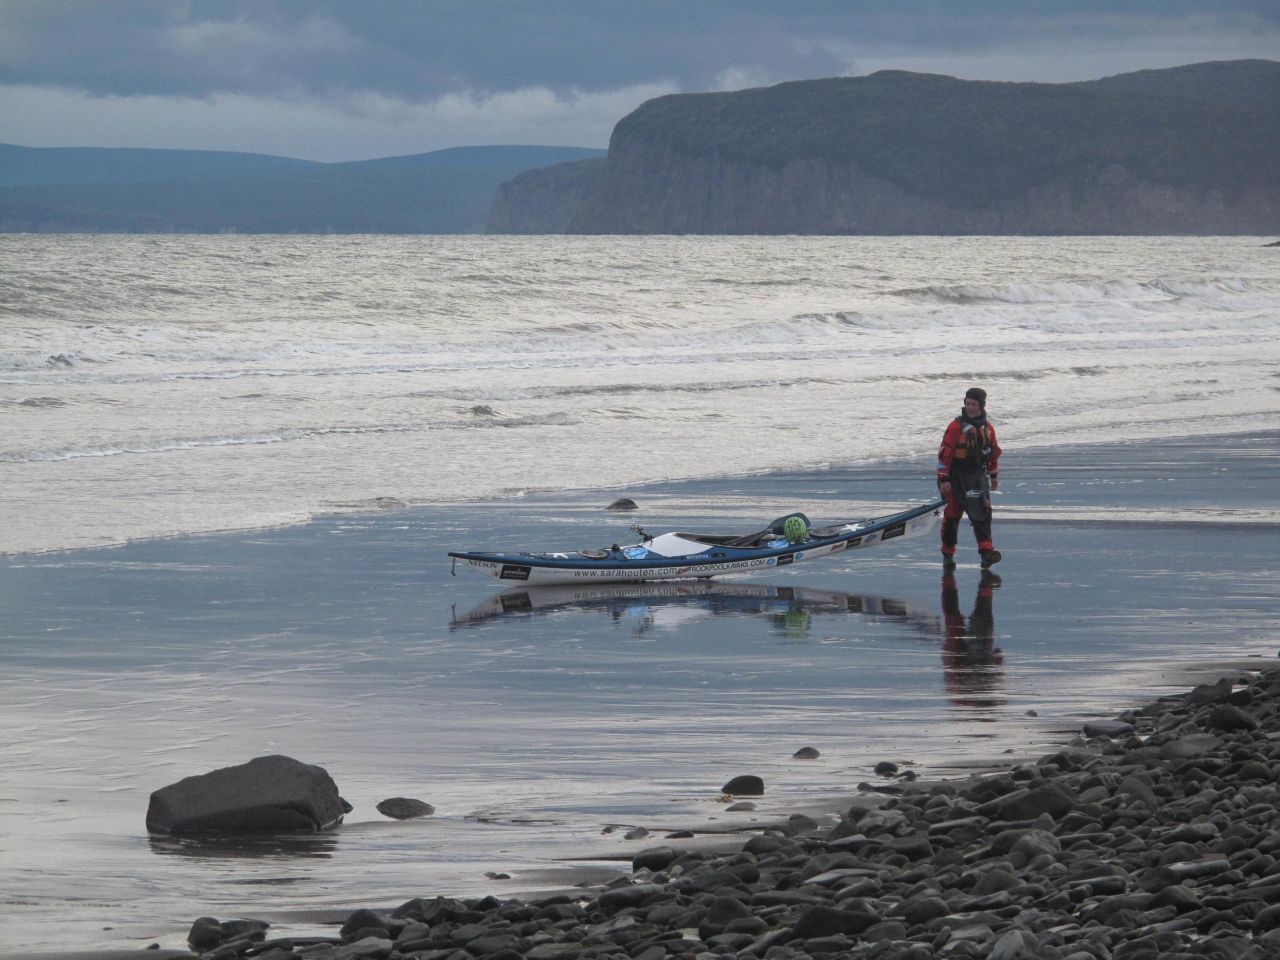 Outen about to launch her kayak to go up the coast from De-Kastri then over to the island of Sakhalin in Russia.